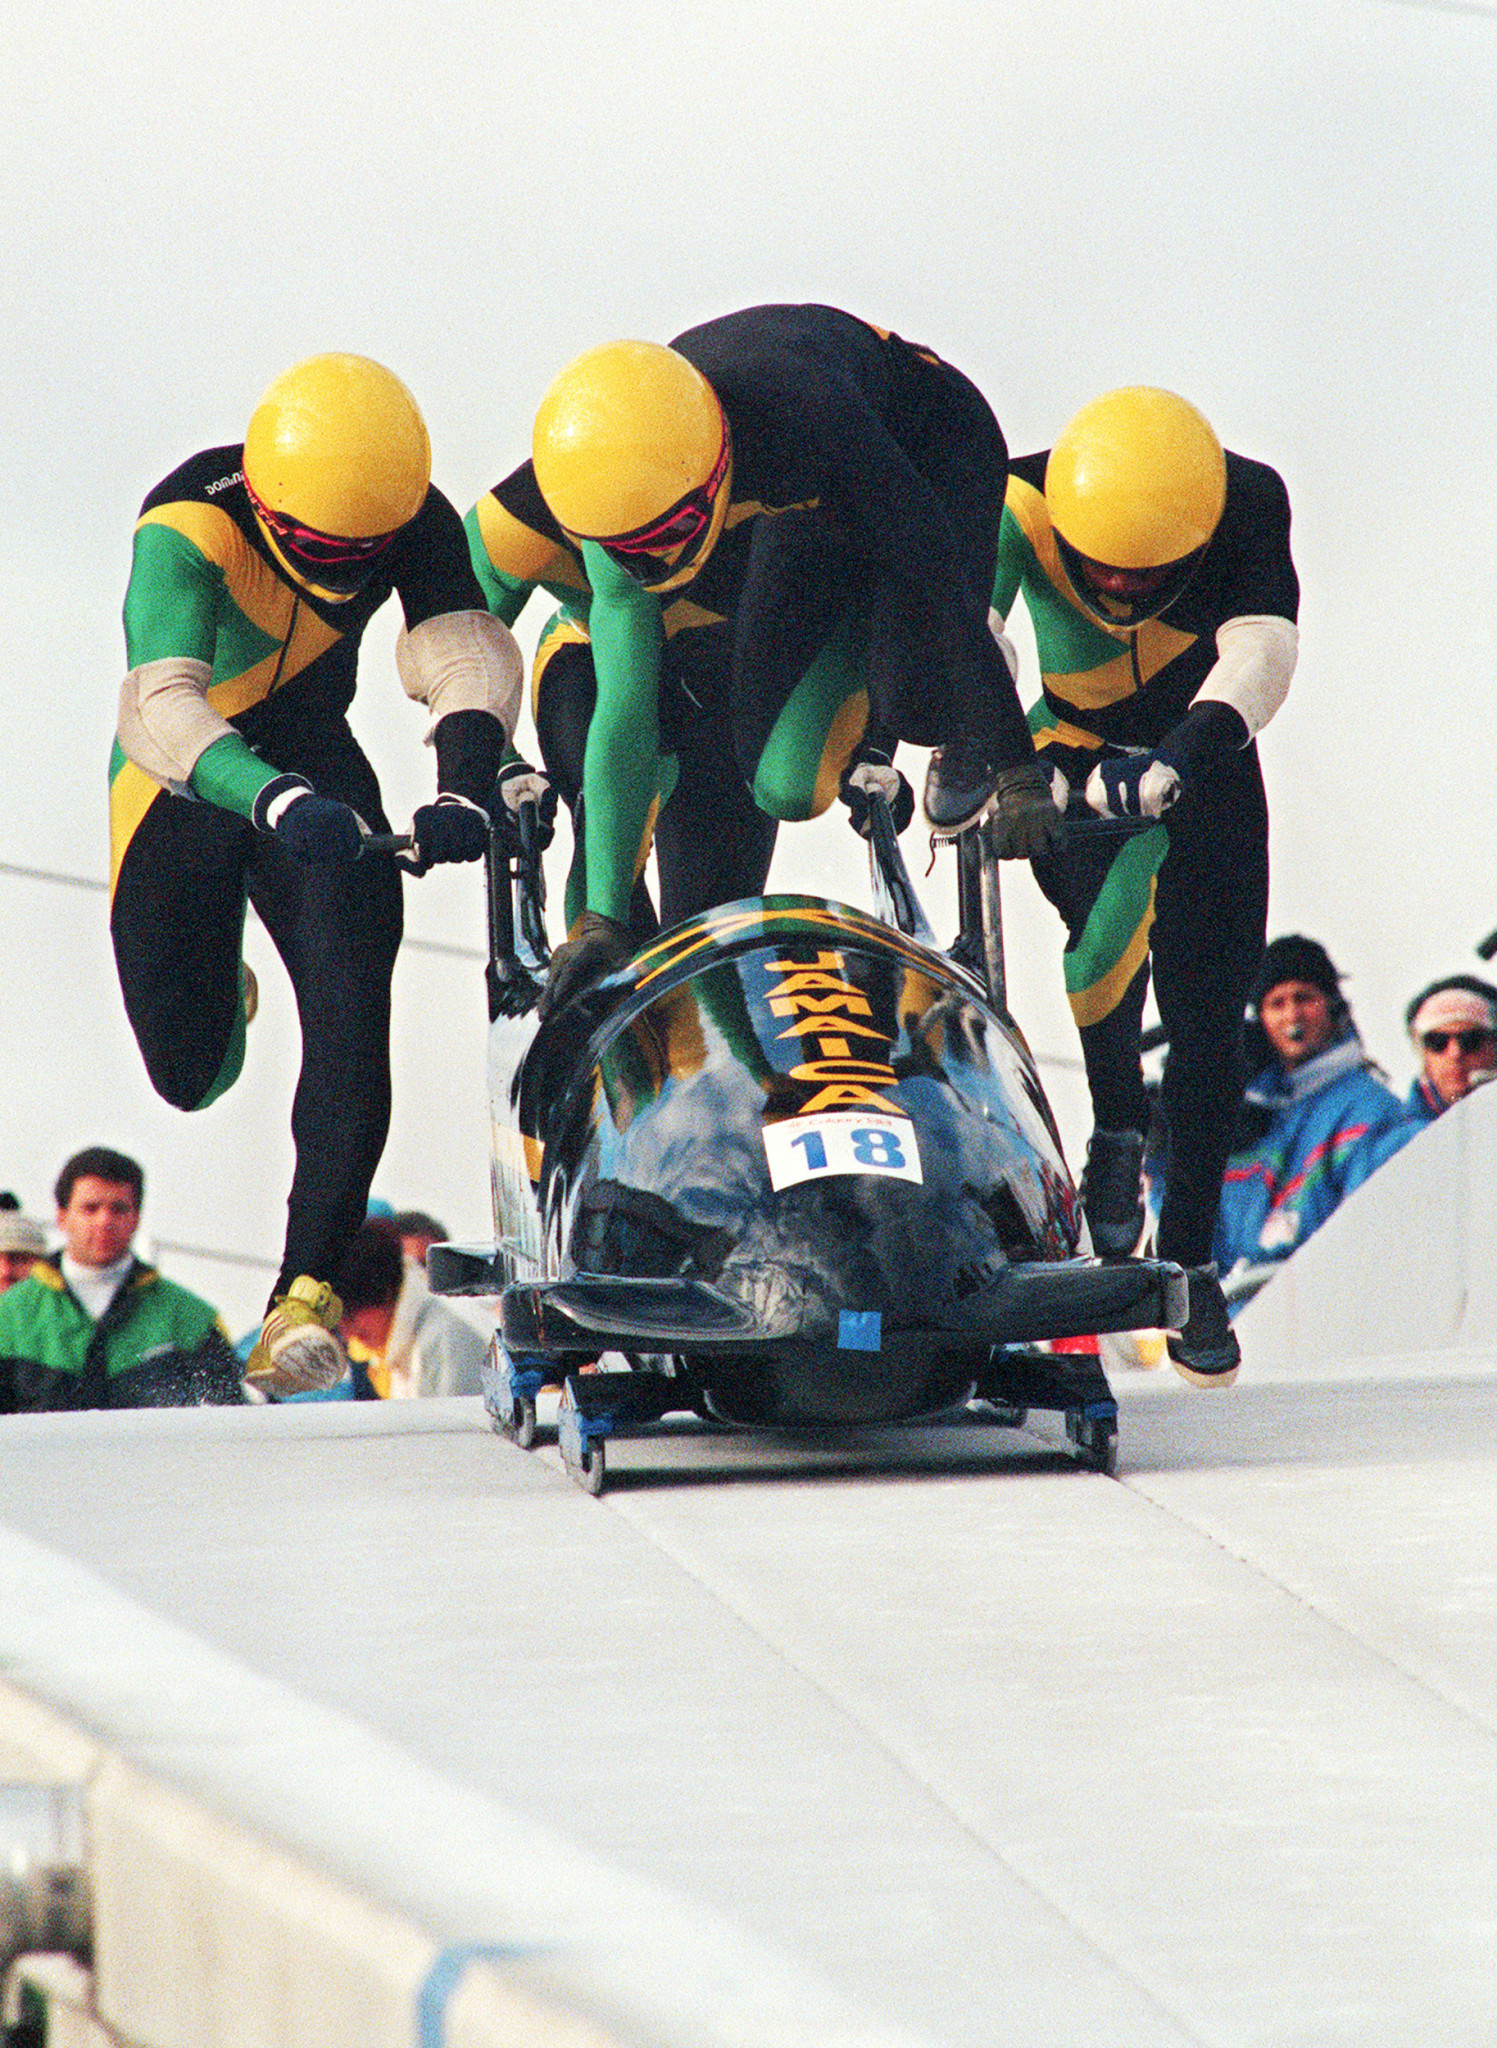 Jamaica's bobsleigh team get their Calgary 1988 Games challenge underway - they finished last, but they started something big...including a cult Hollywood move Cool Runnings ©Getty Images